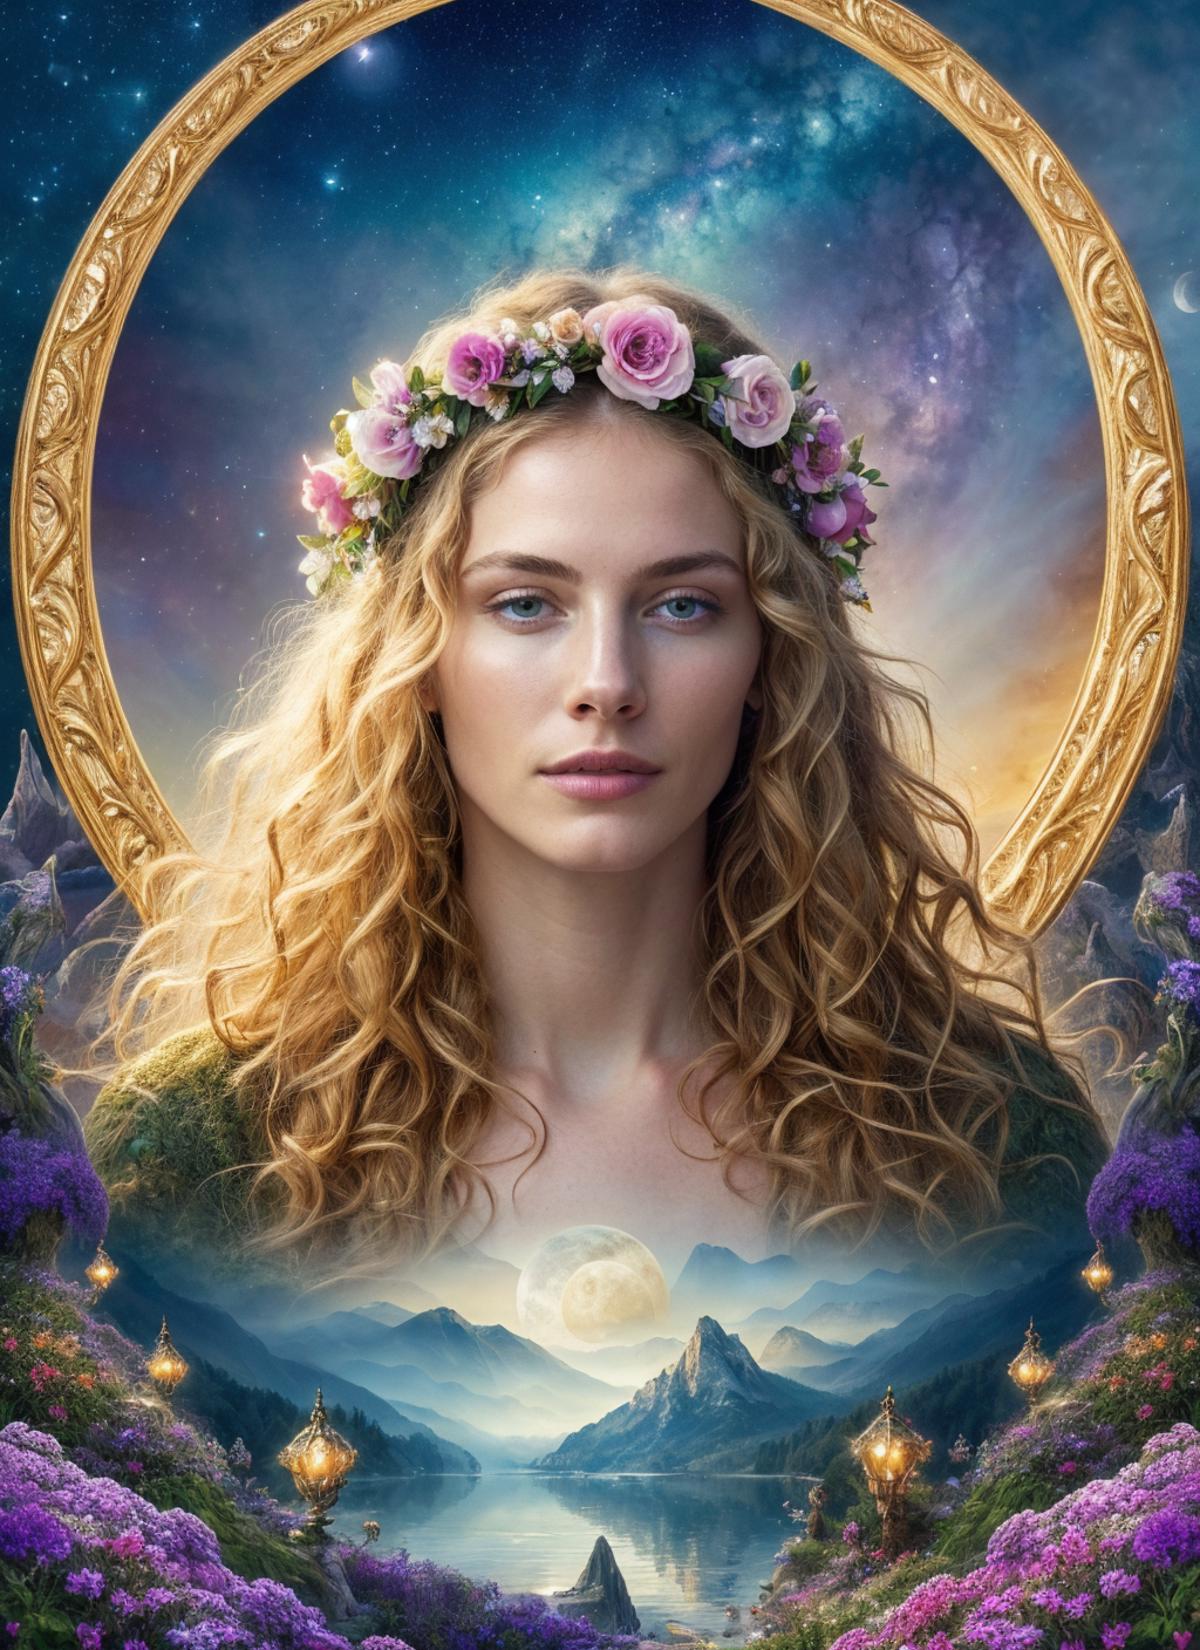 A woman with long hair wearing a flower crown on a poster.